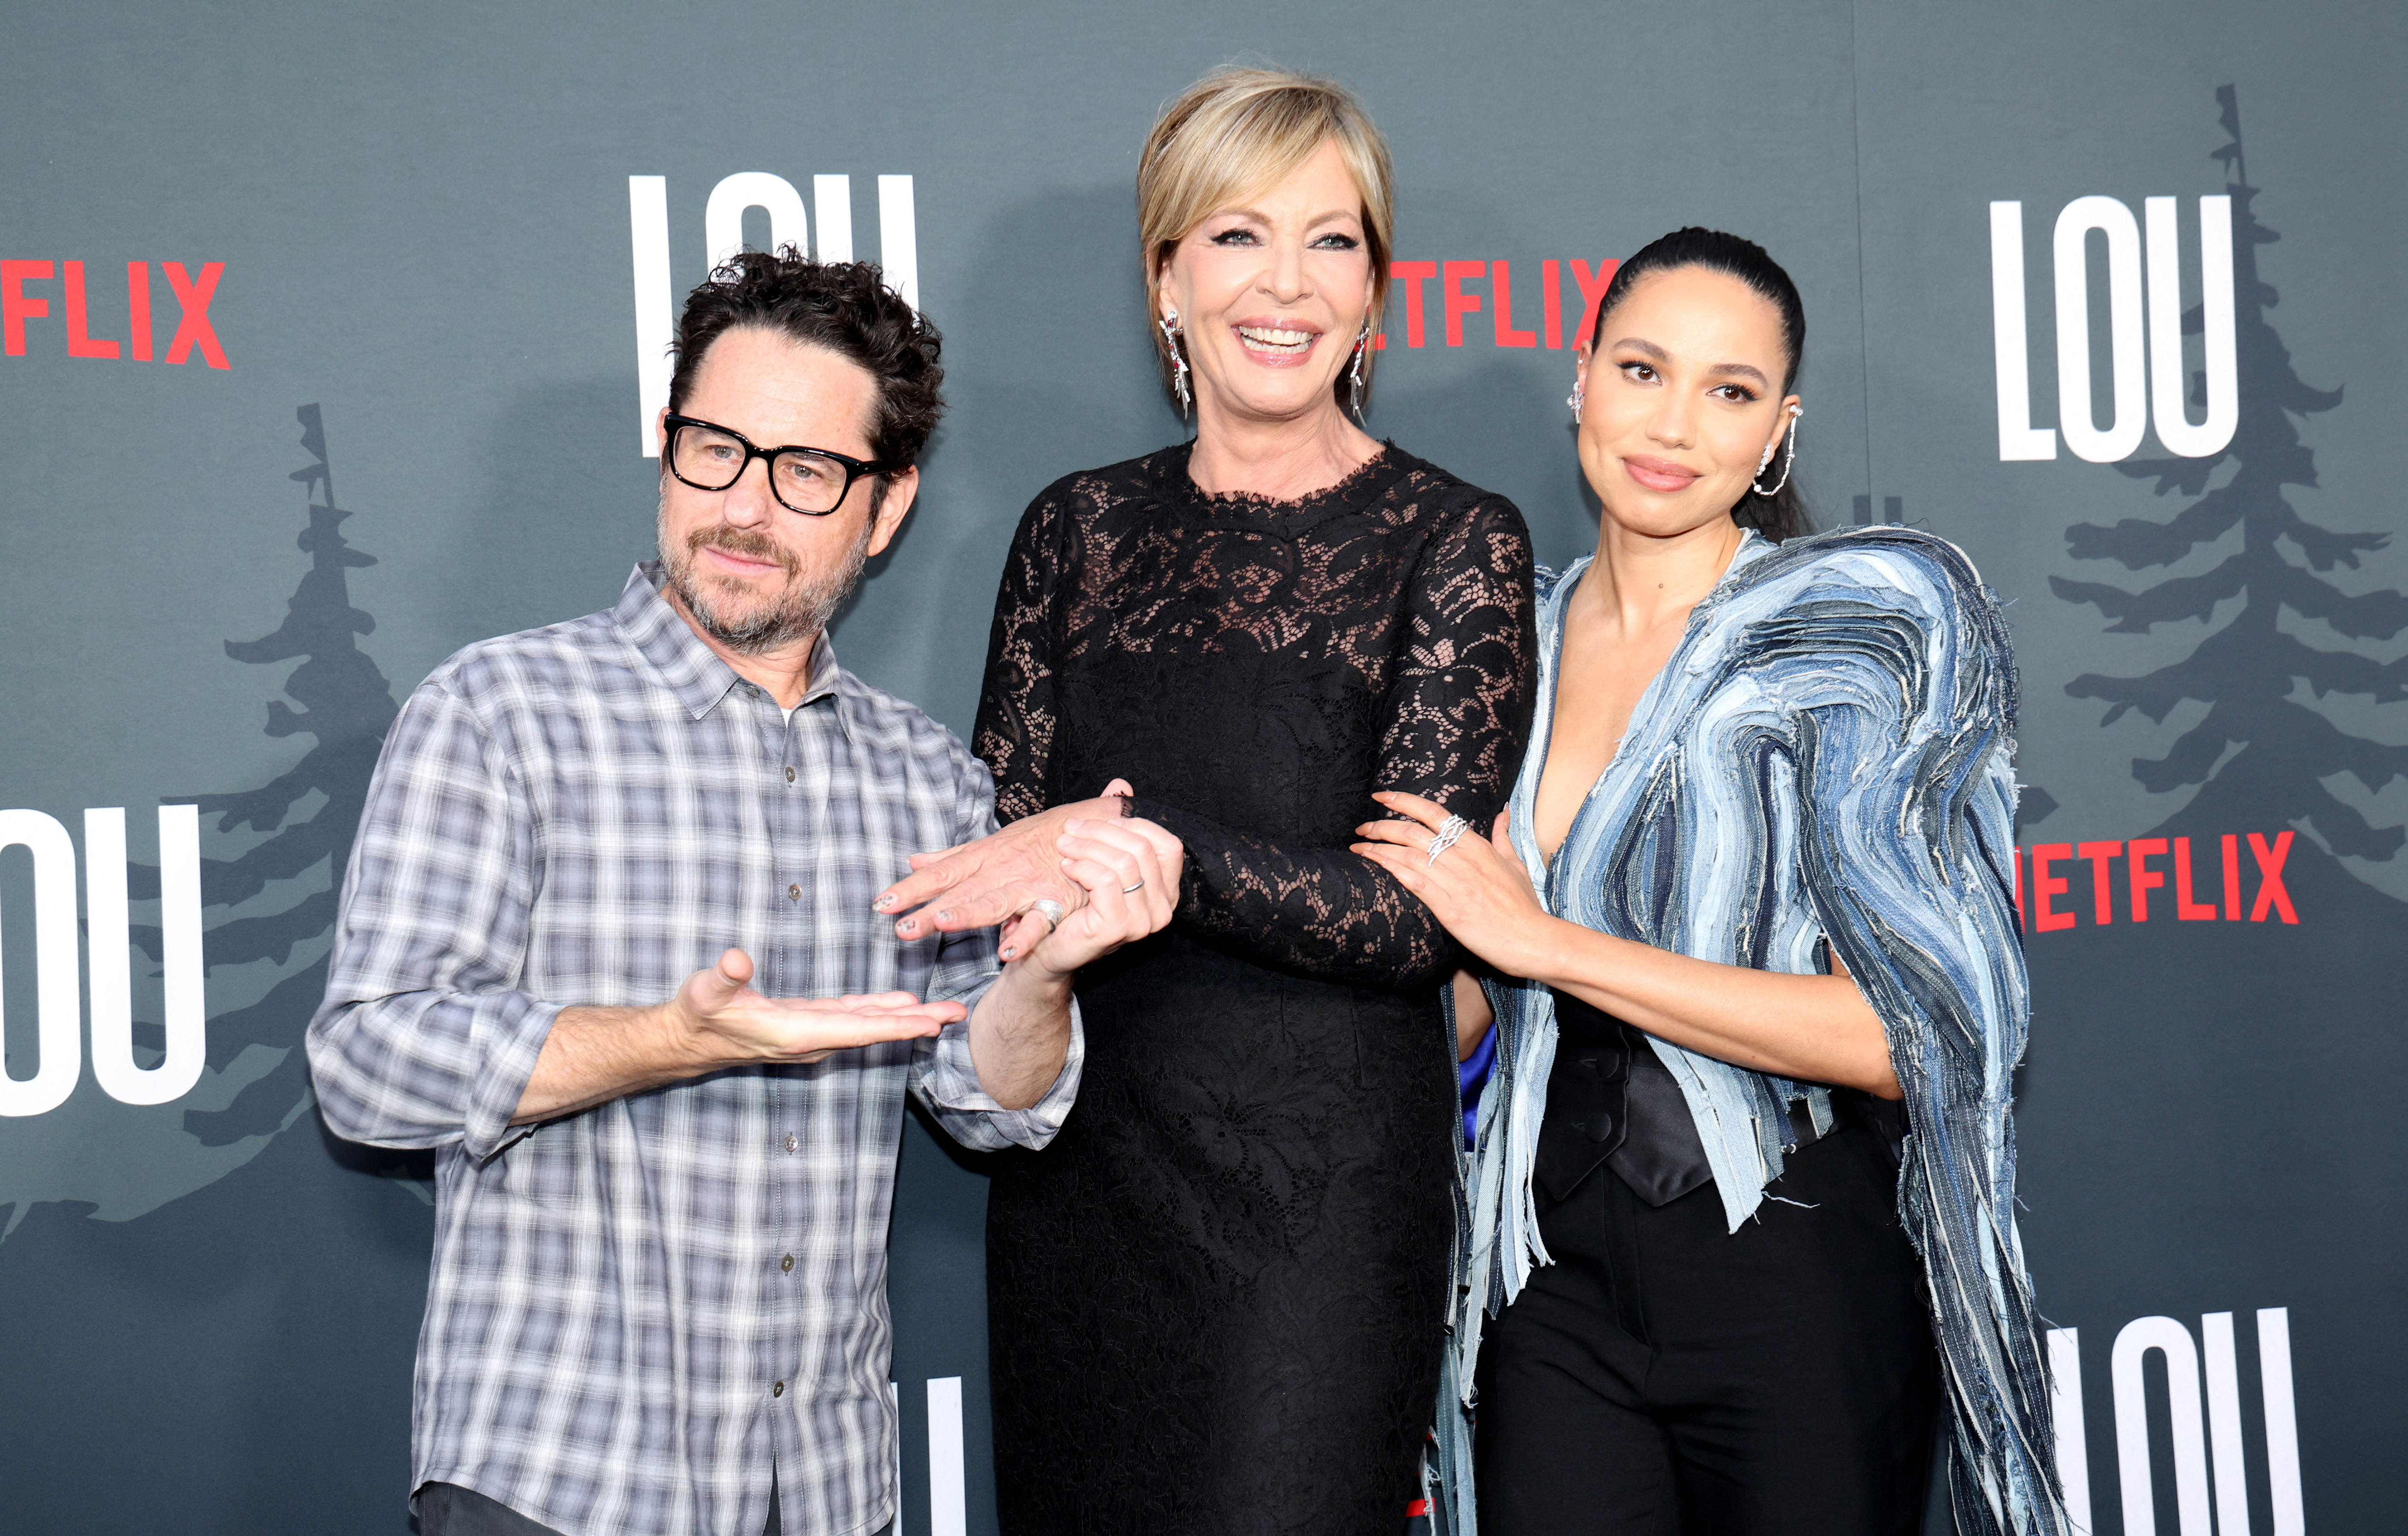 Producer J.J. Abrams, cast members Allison Janney and Jurnee Smollett pose at a premiere for the film Lou in Los Angeles, California, U.S., September 15, 2022. REUTERS/Mario Anzuoni